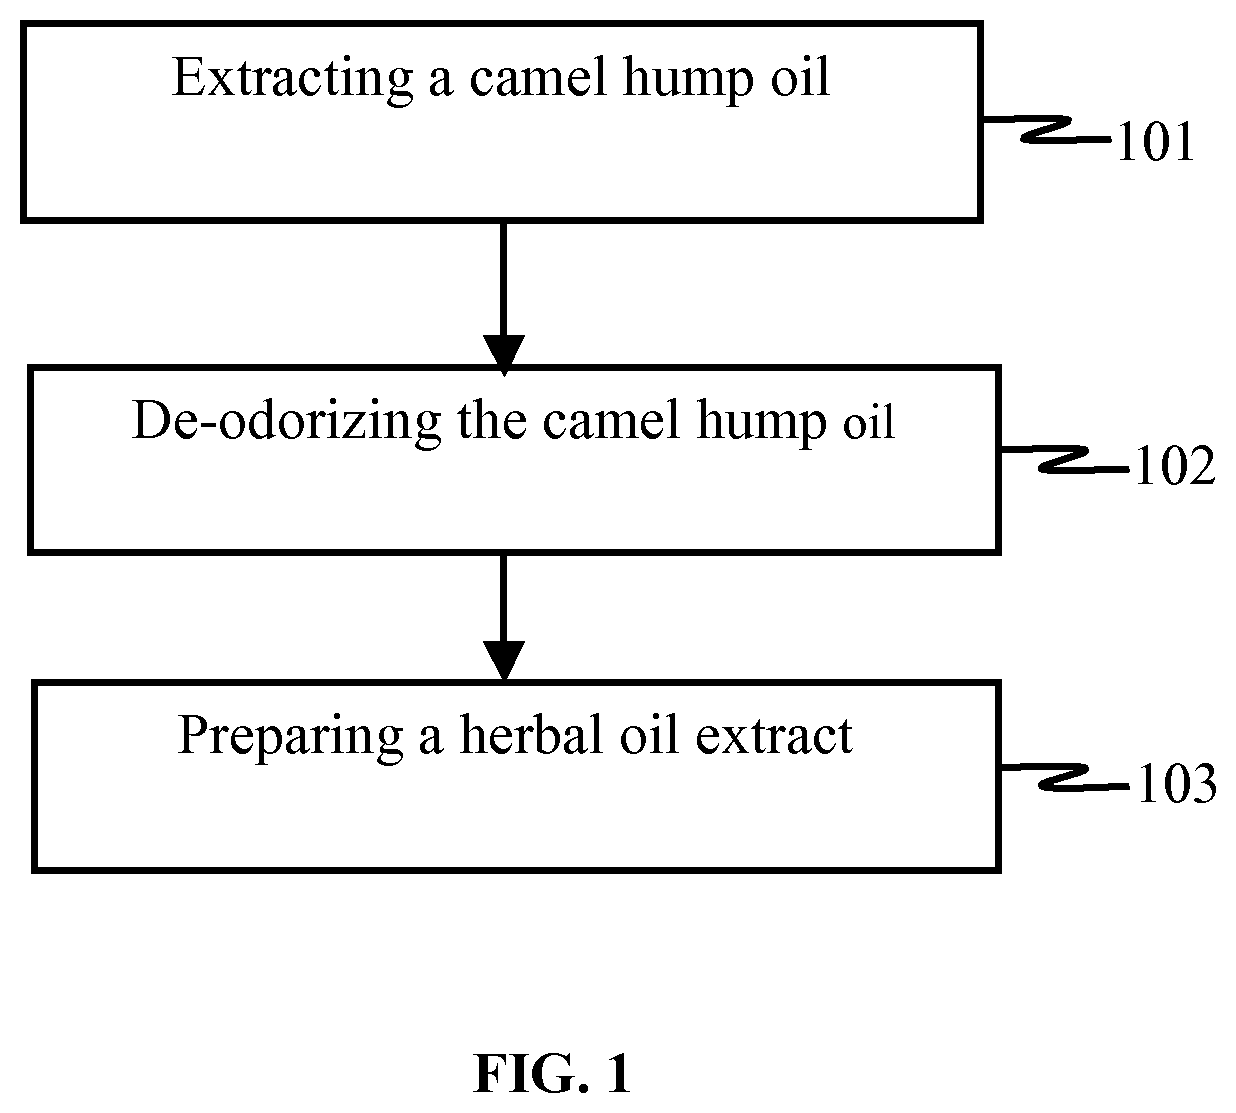 Camel hump-oil based herbal compositions and method of making the same